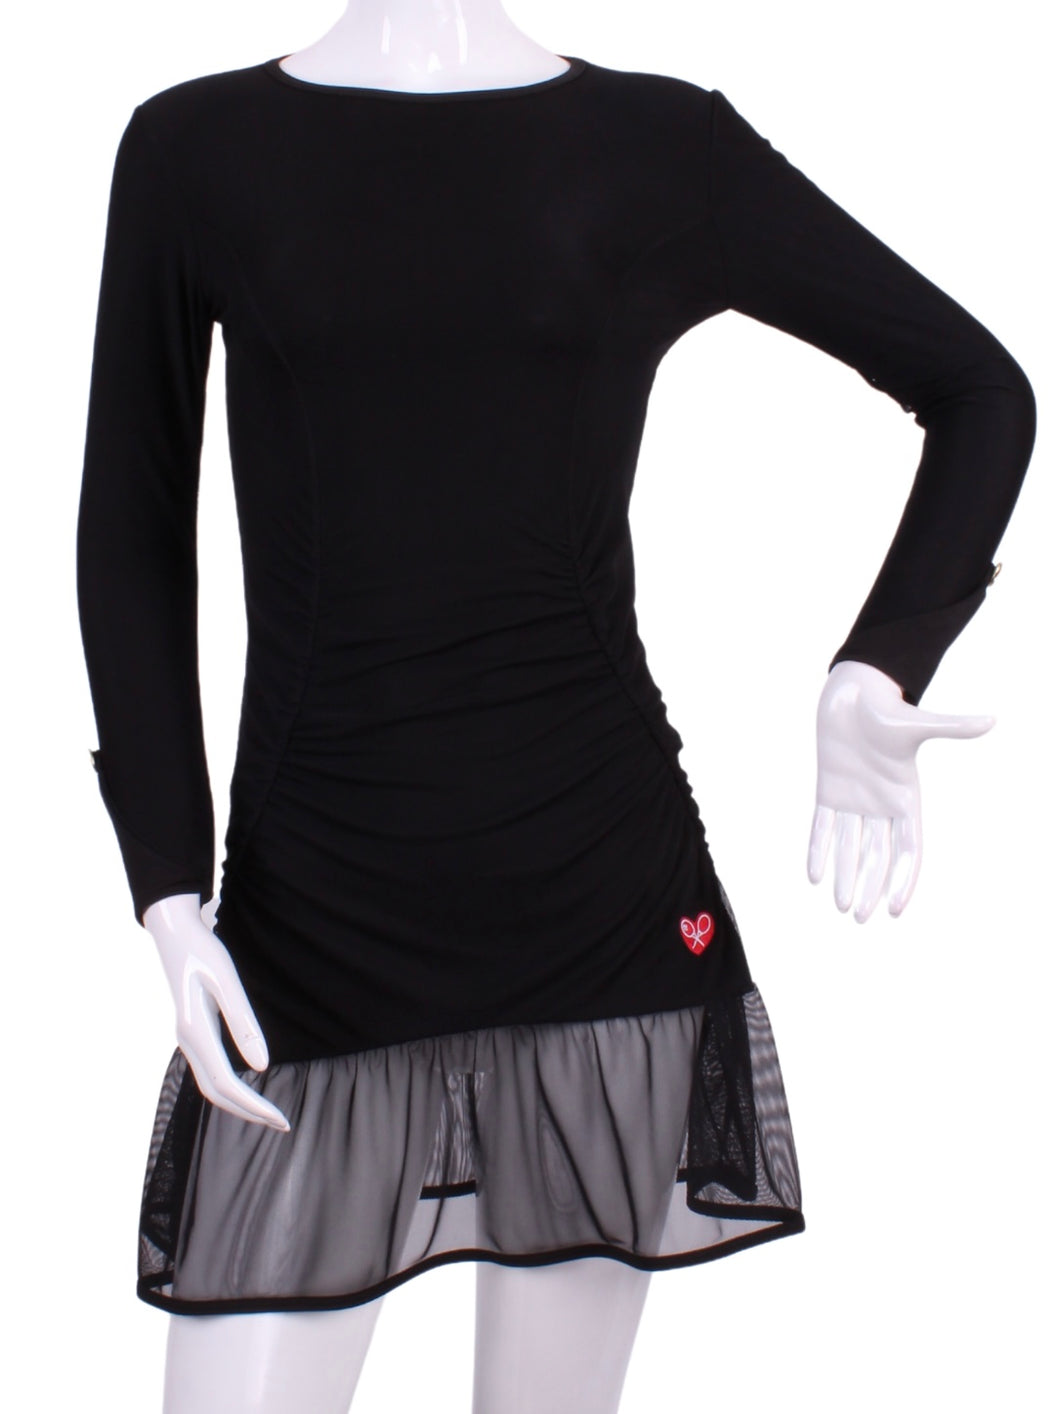 Long Sleeve Monroe Black Mesh Tennis Dress. The Monroe Dress offers a little more coverage around the chest and the arms, but delicately shows your feminine curves. Our dress is fitted, and flares out at the skirt. It is perfect for tennis, running and golf, and of course, a trip to your after-court party with your friends. It was designed for confident women like you! This style is in black with mesh, with a flattering bateau neckline.